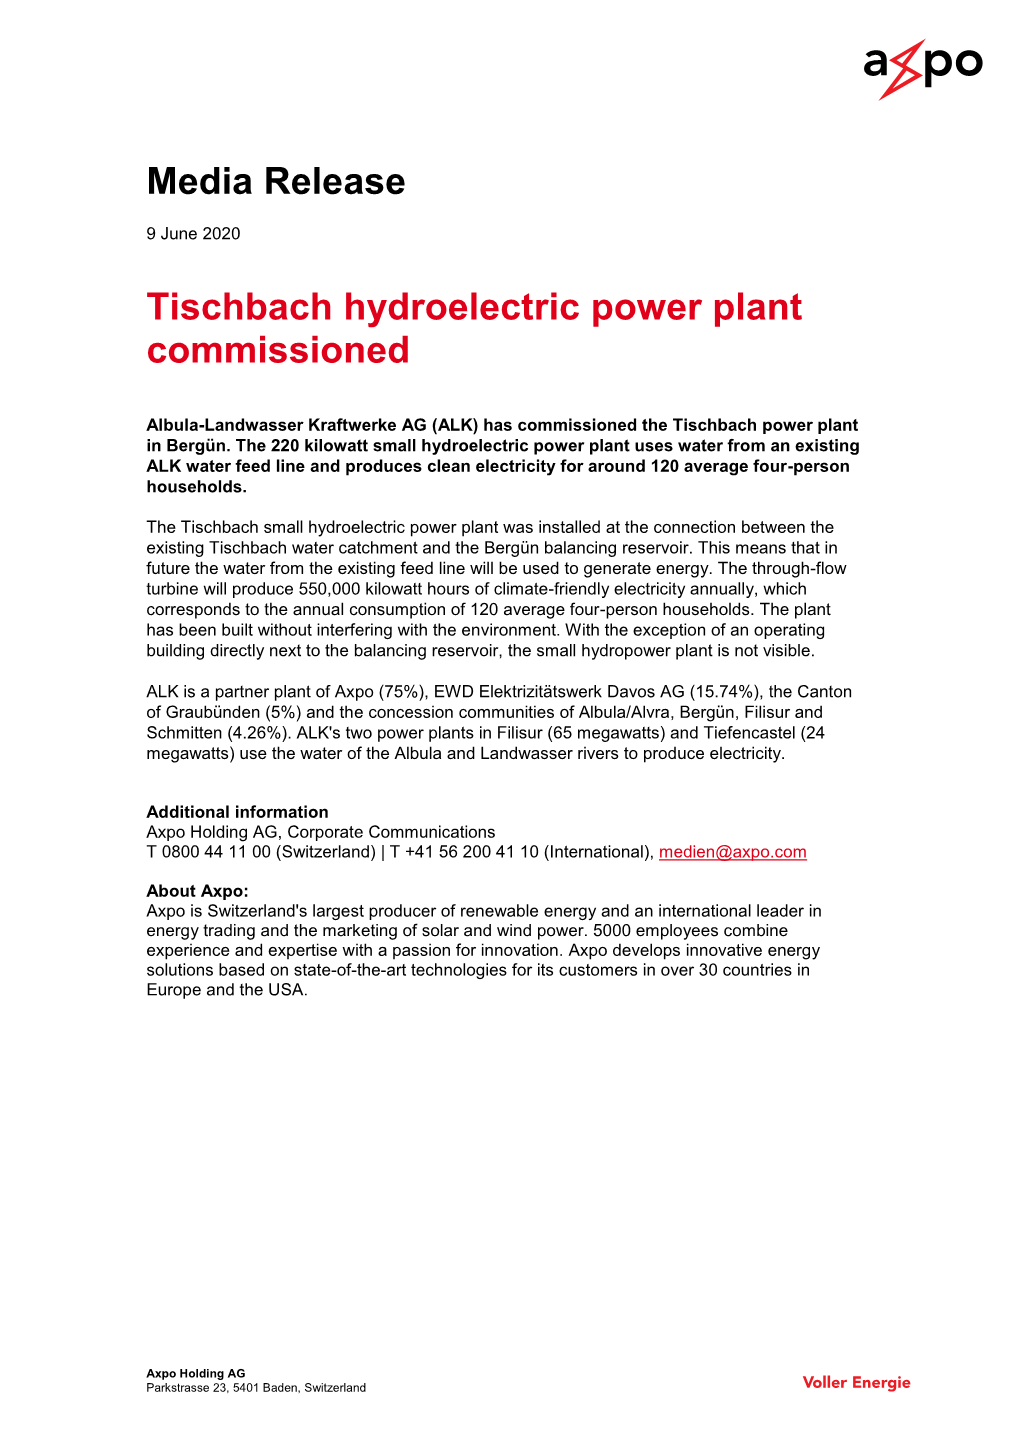 Media Release Tischbach Hydroelectric Power Plant